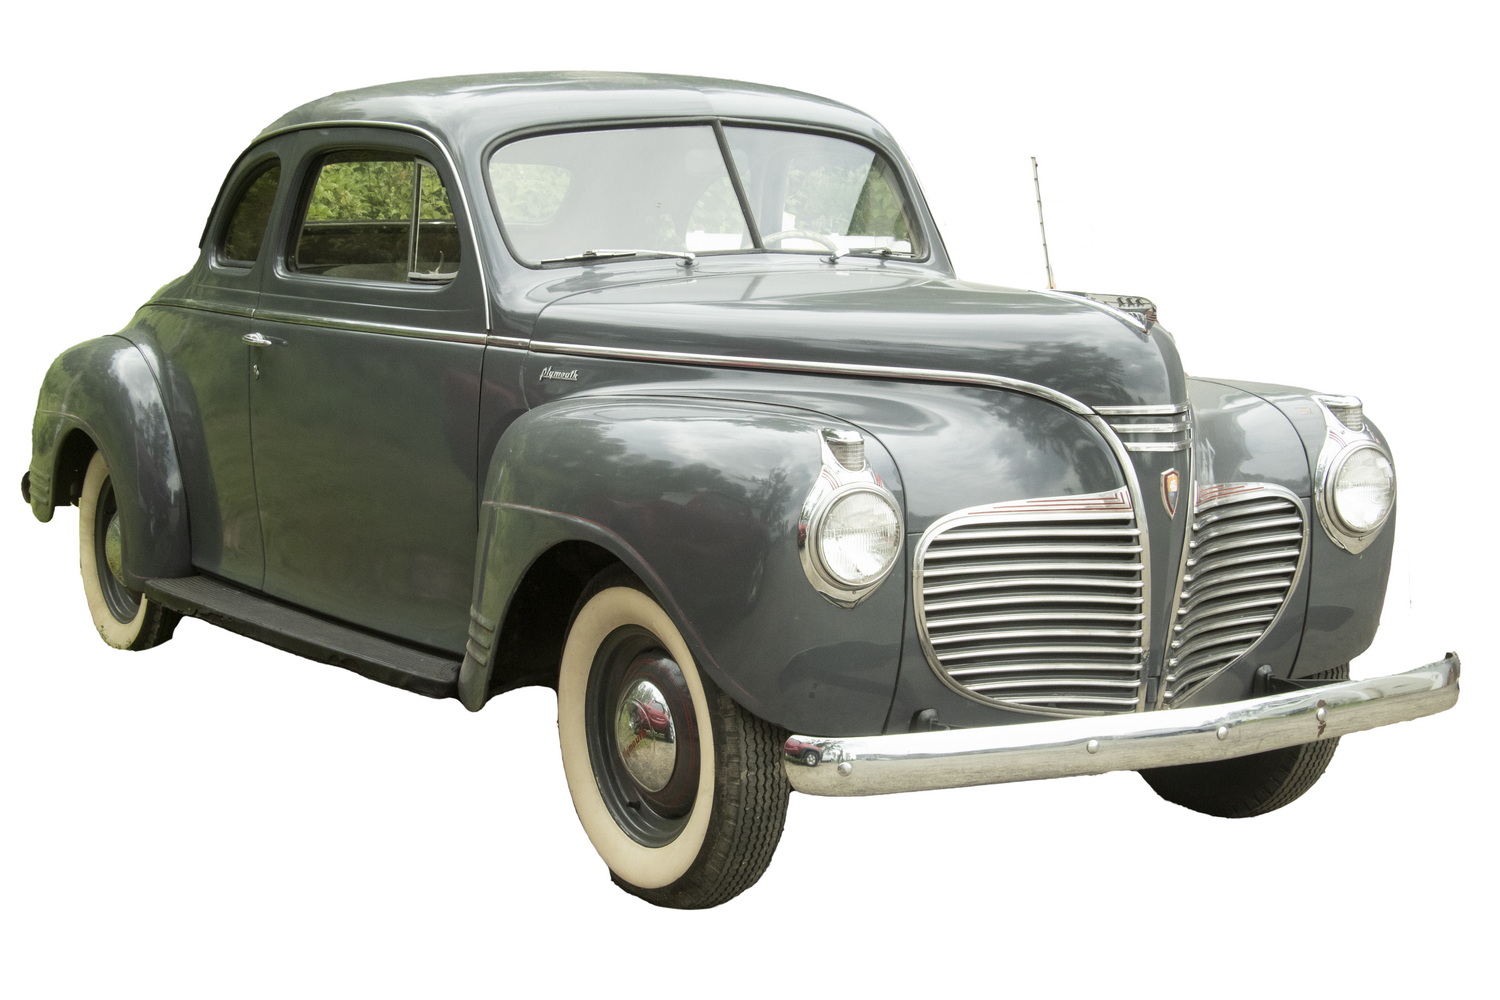 MARGARET CHASE SMITH'S 1941 PLYMOUTH